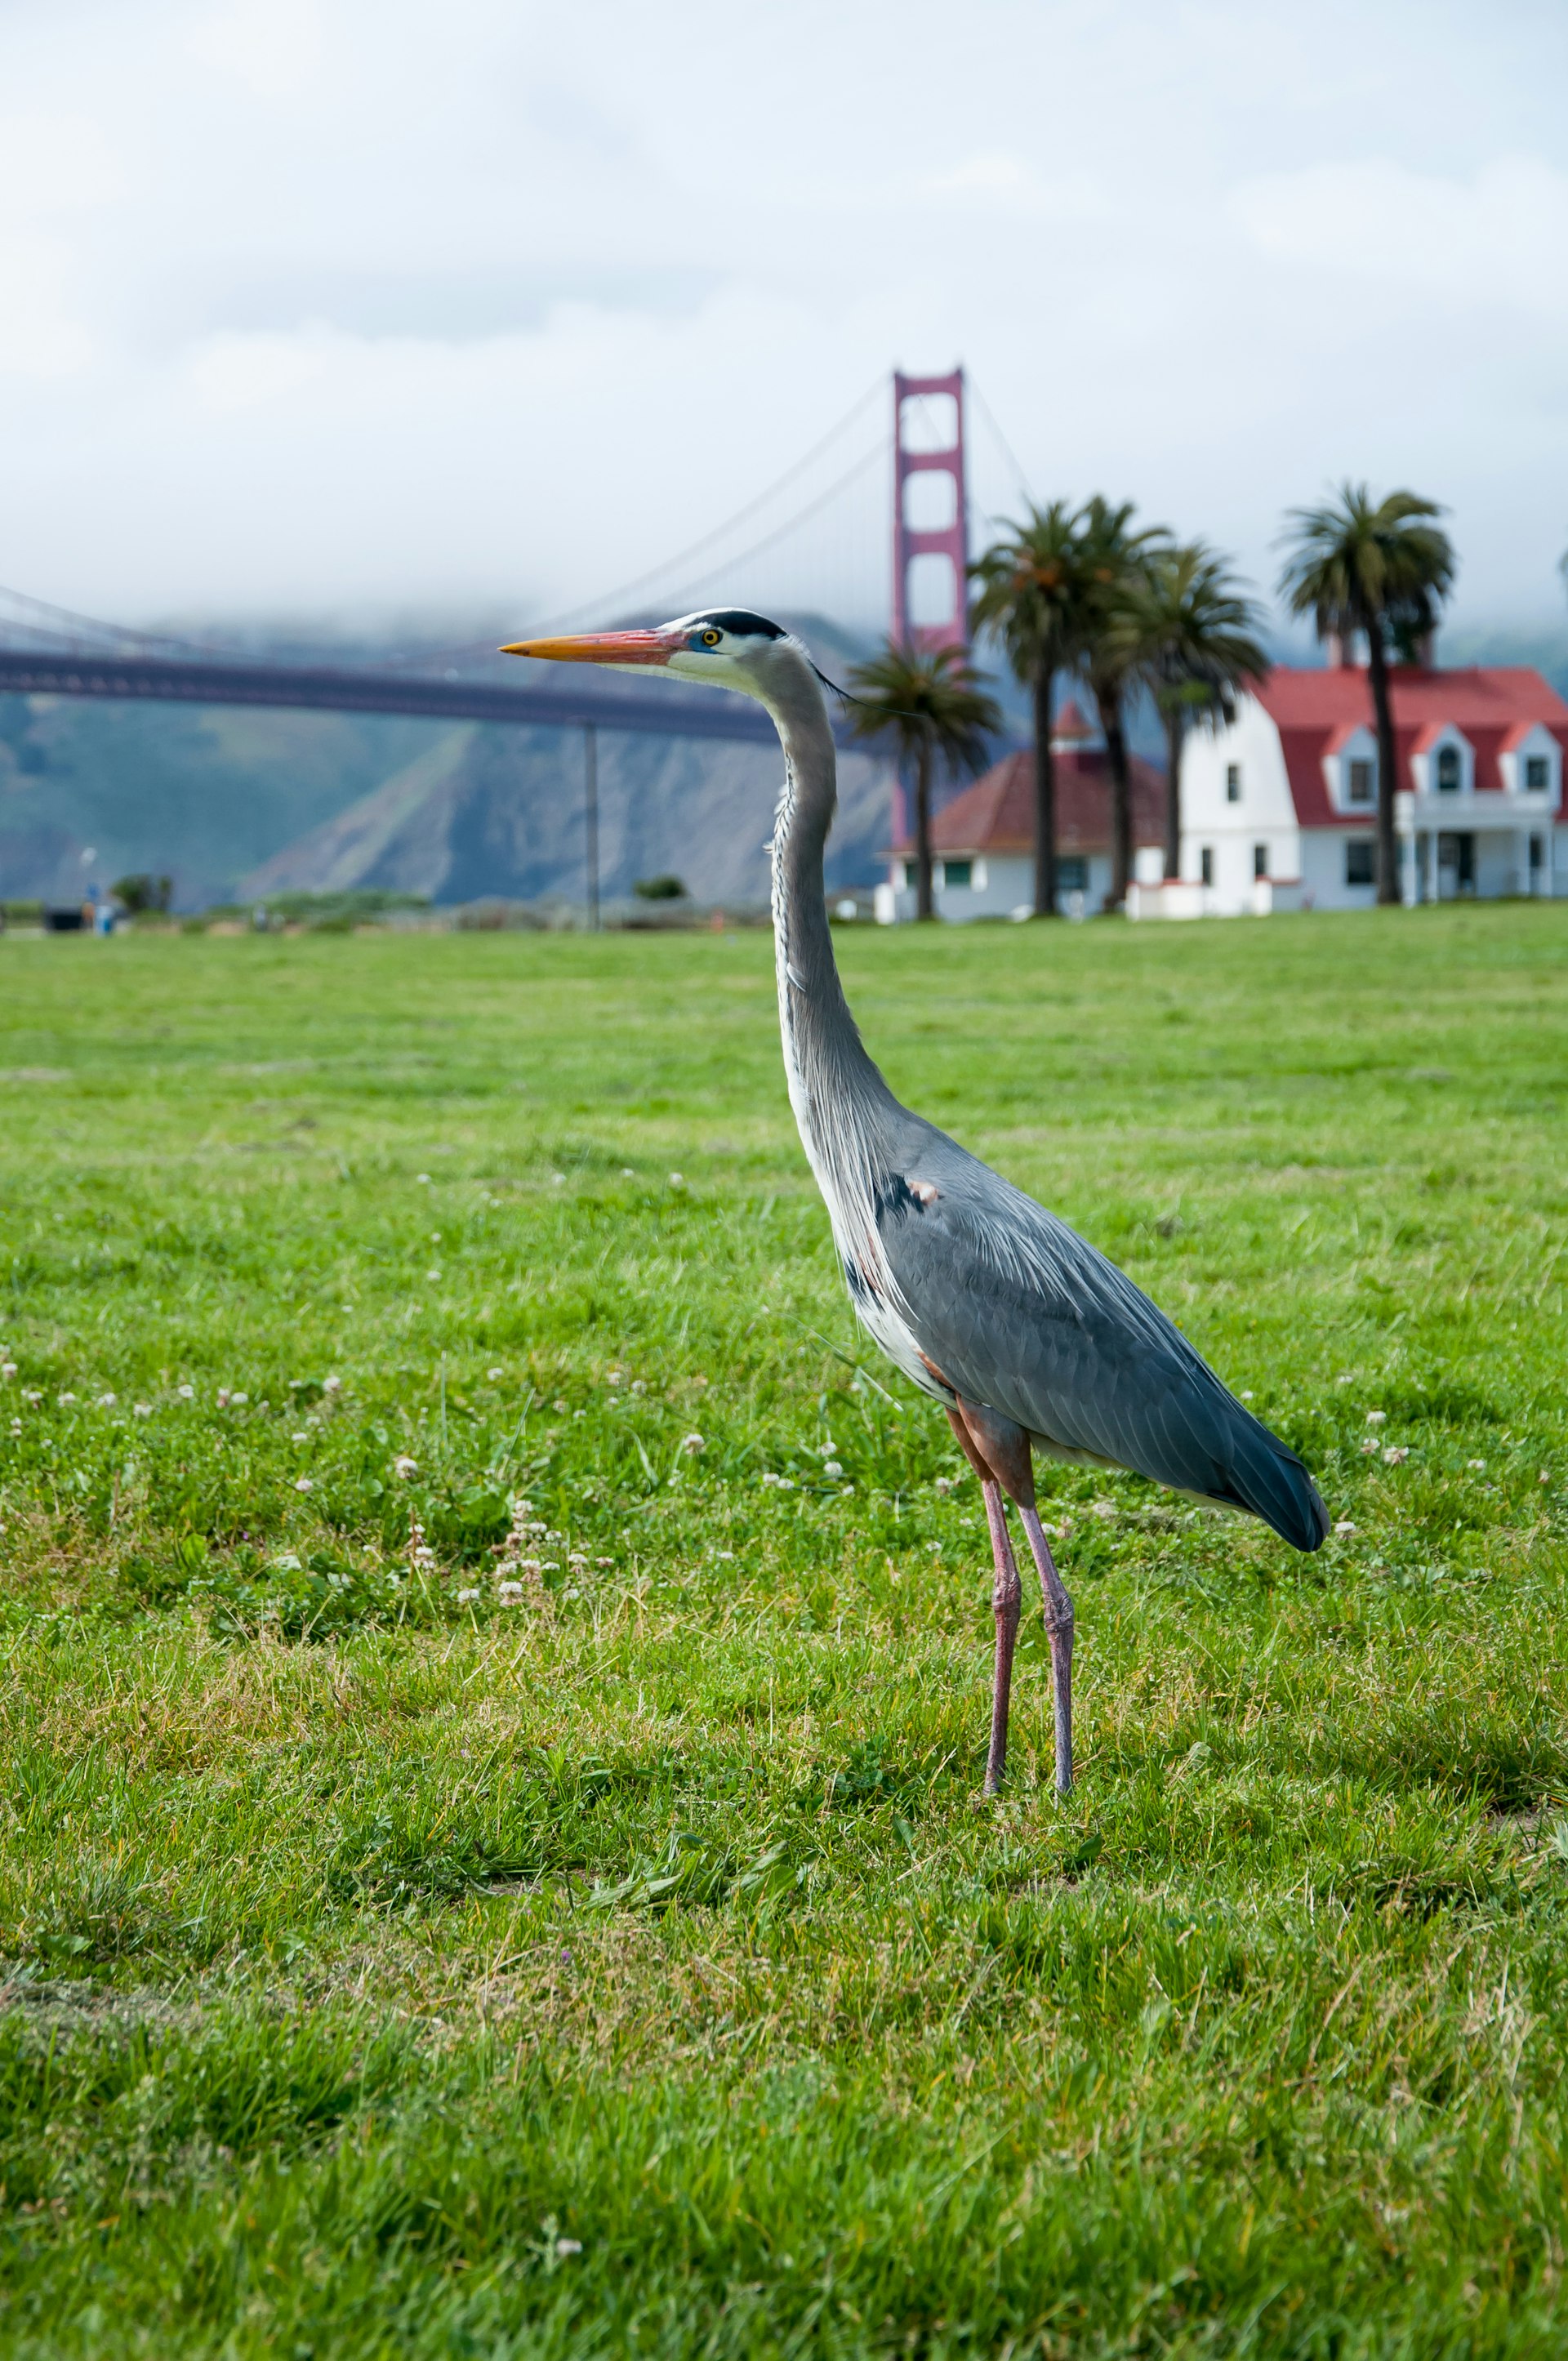 A crane grus in front of the red Golden Gate Bridge in San Francisco.